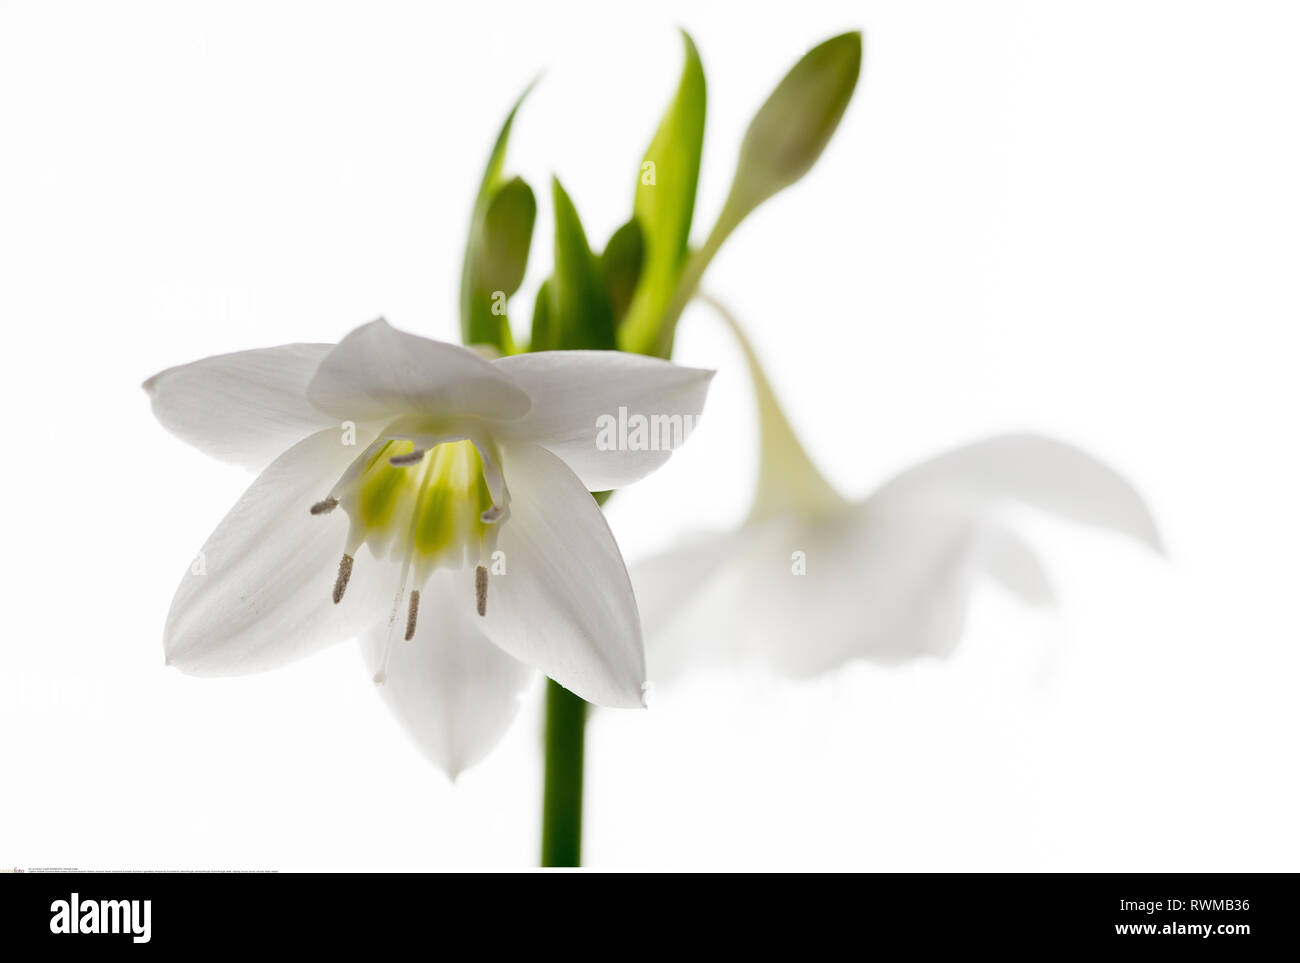 botany, Eucharis blossom, Caution! For Greetingcard-Use / Postcard-Use In German Speaking Countries Certain Restrictions May Apply Stock Photo